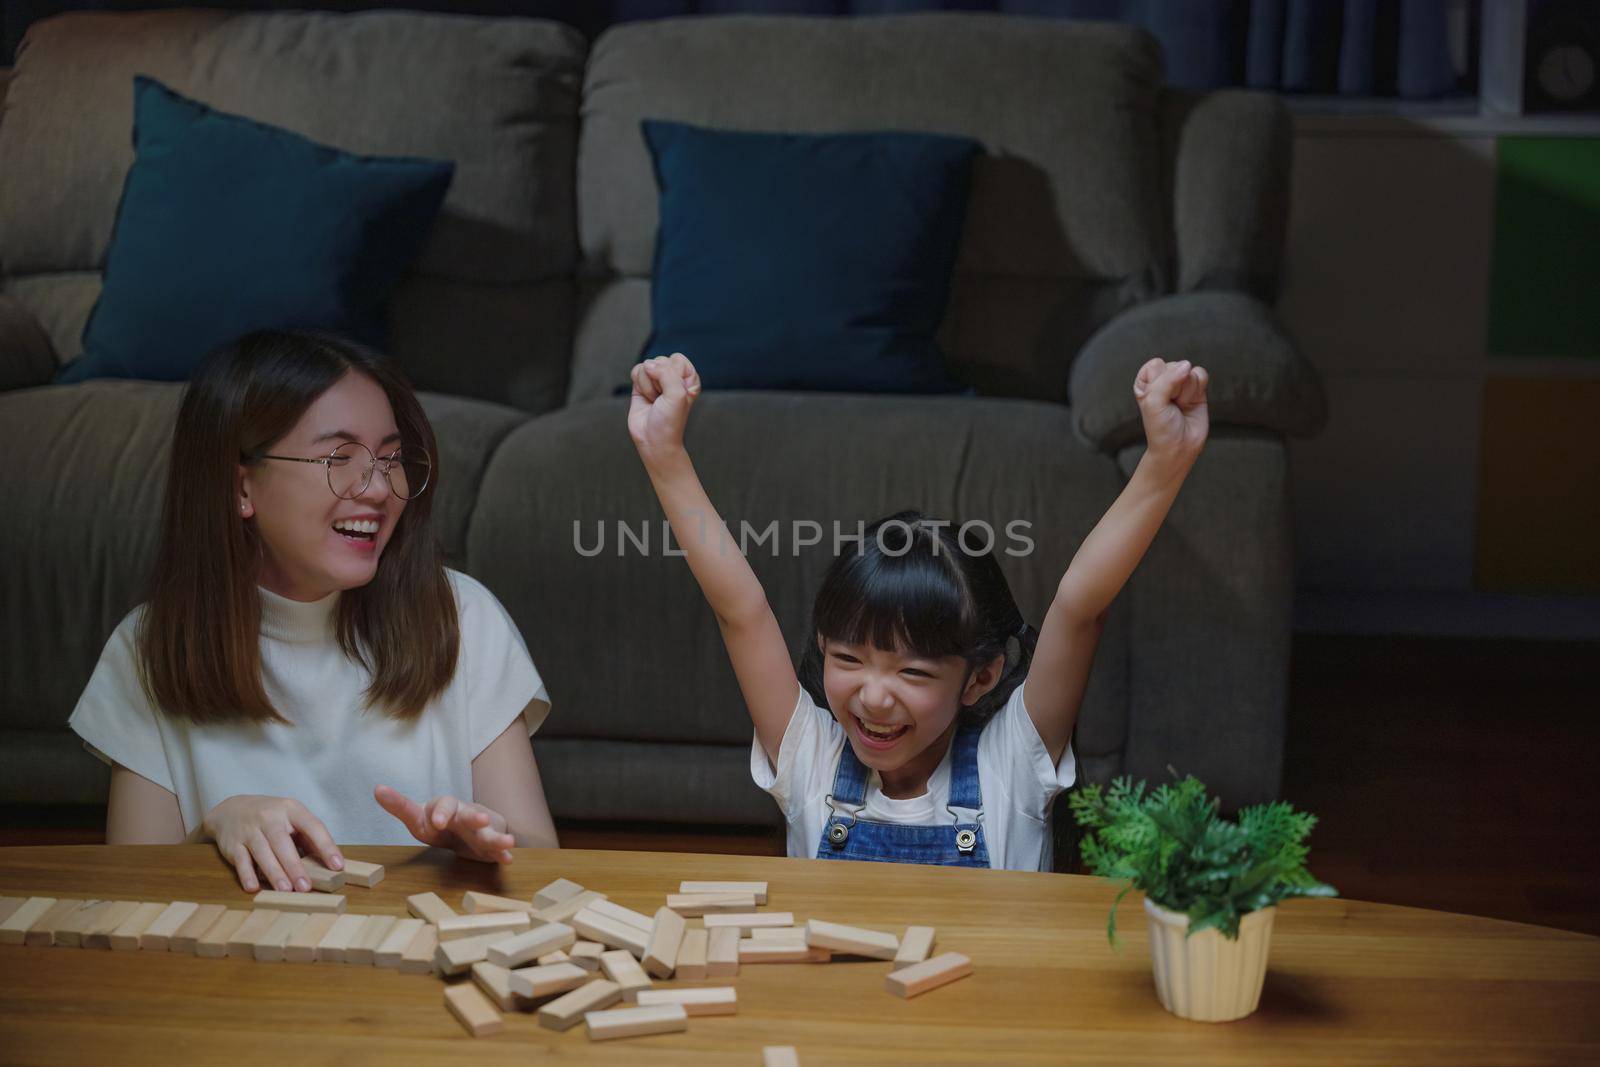 Asian young mother playing game in wood block with her little daughter in home living room at night time, Smiling woman help teach child play build constructor of wooden blocks, education